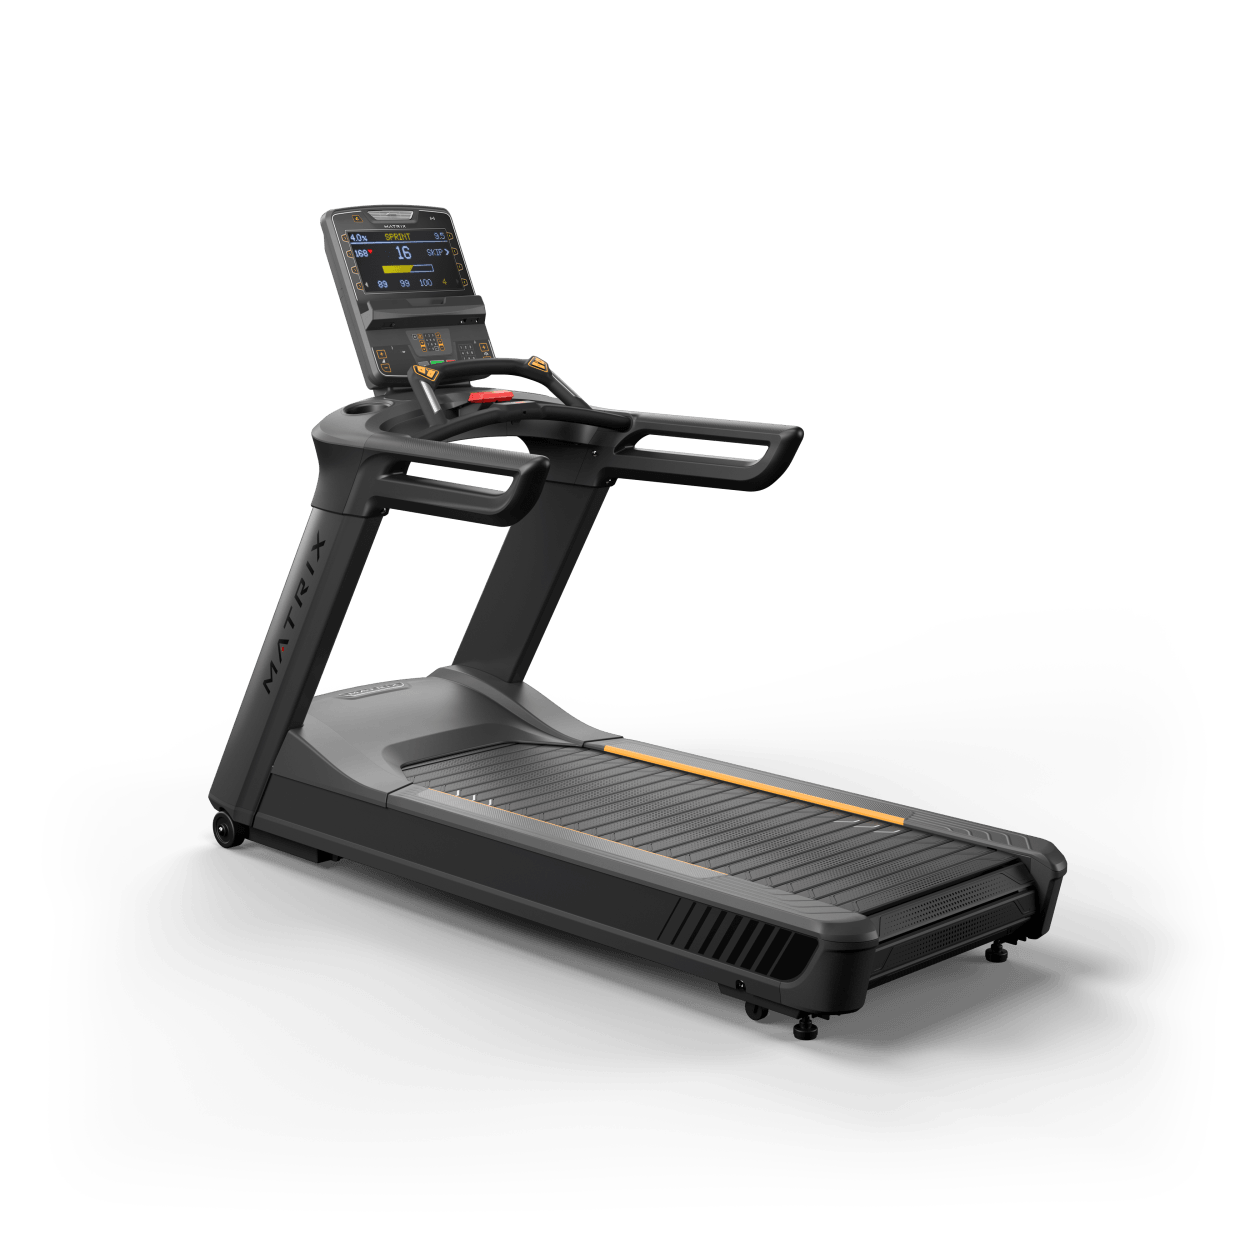 Matrix Fitness Performance Plus Treadmill with Premium LED Console full view | Fitness Experience